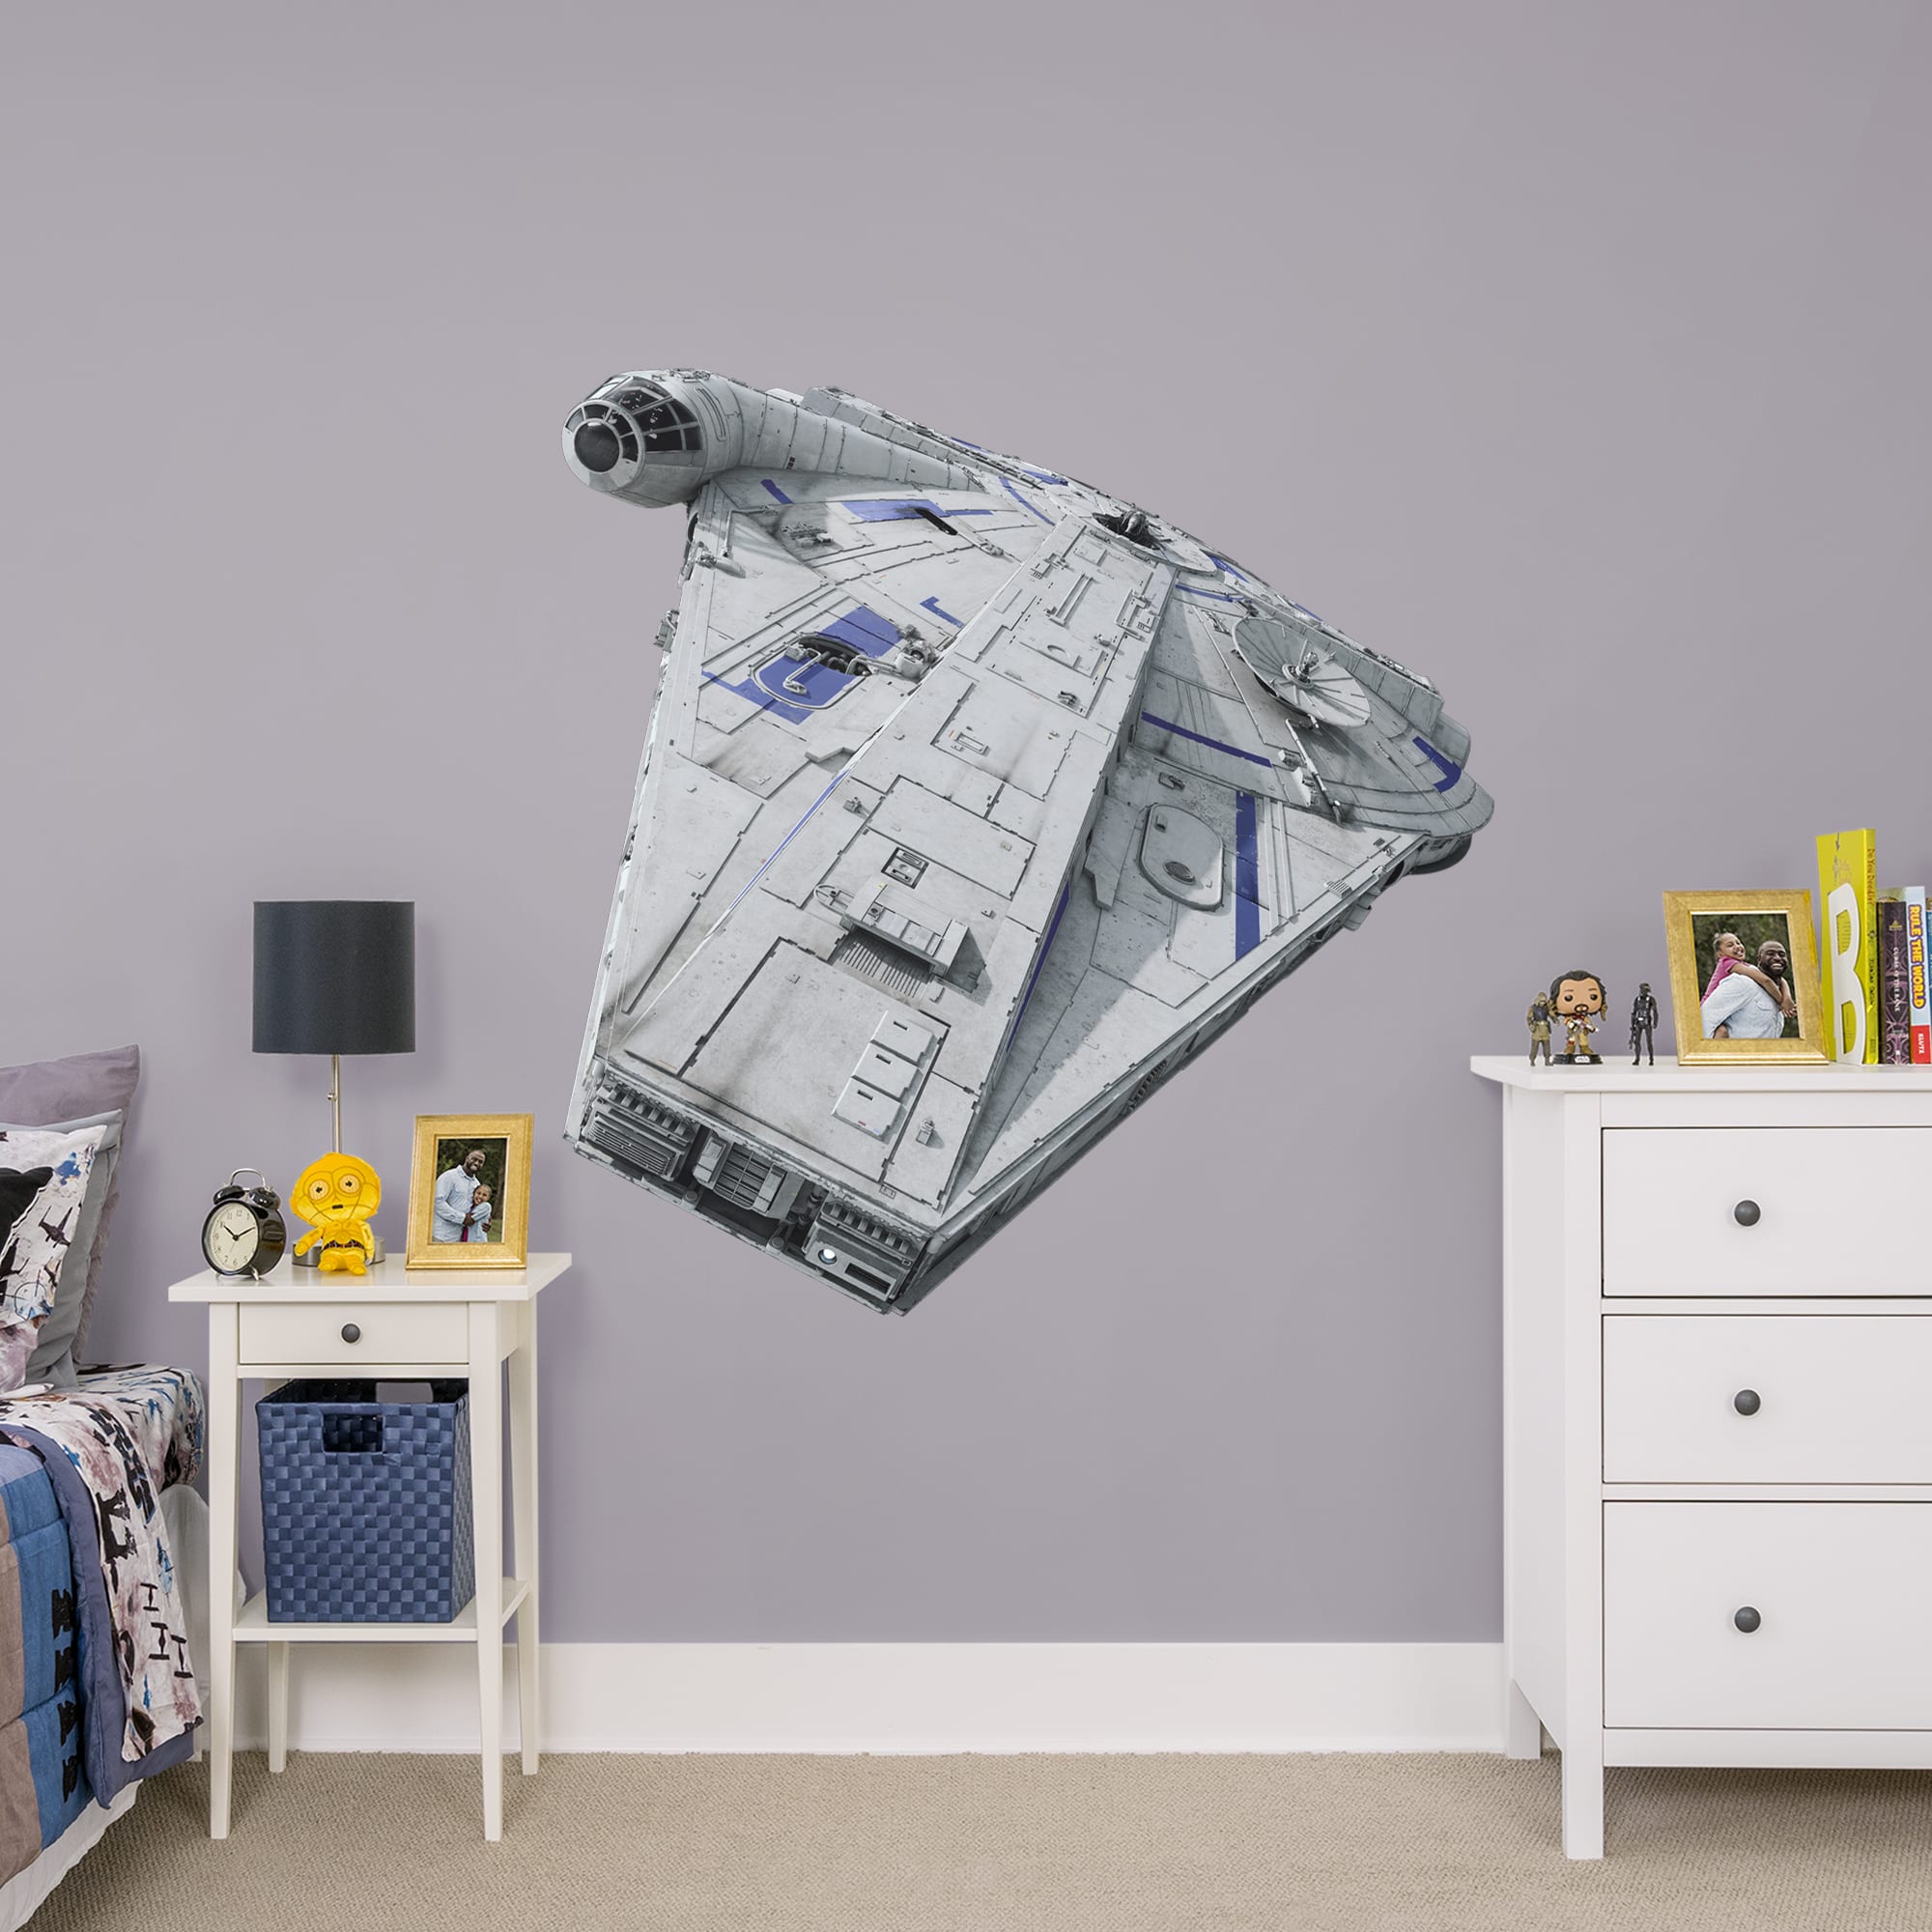 Millennium Falcon - Solo: A Star Wars Story - Officially Licensed Removable Wall Decal Huge Ship + 2 Decals (52"W x 52"H) by Fat